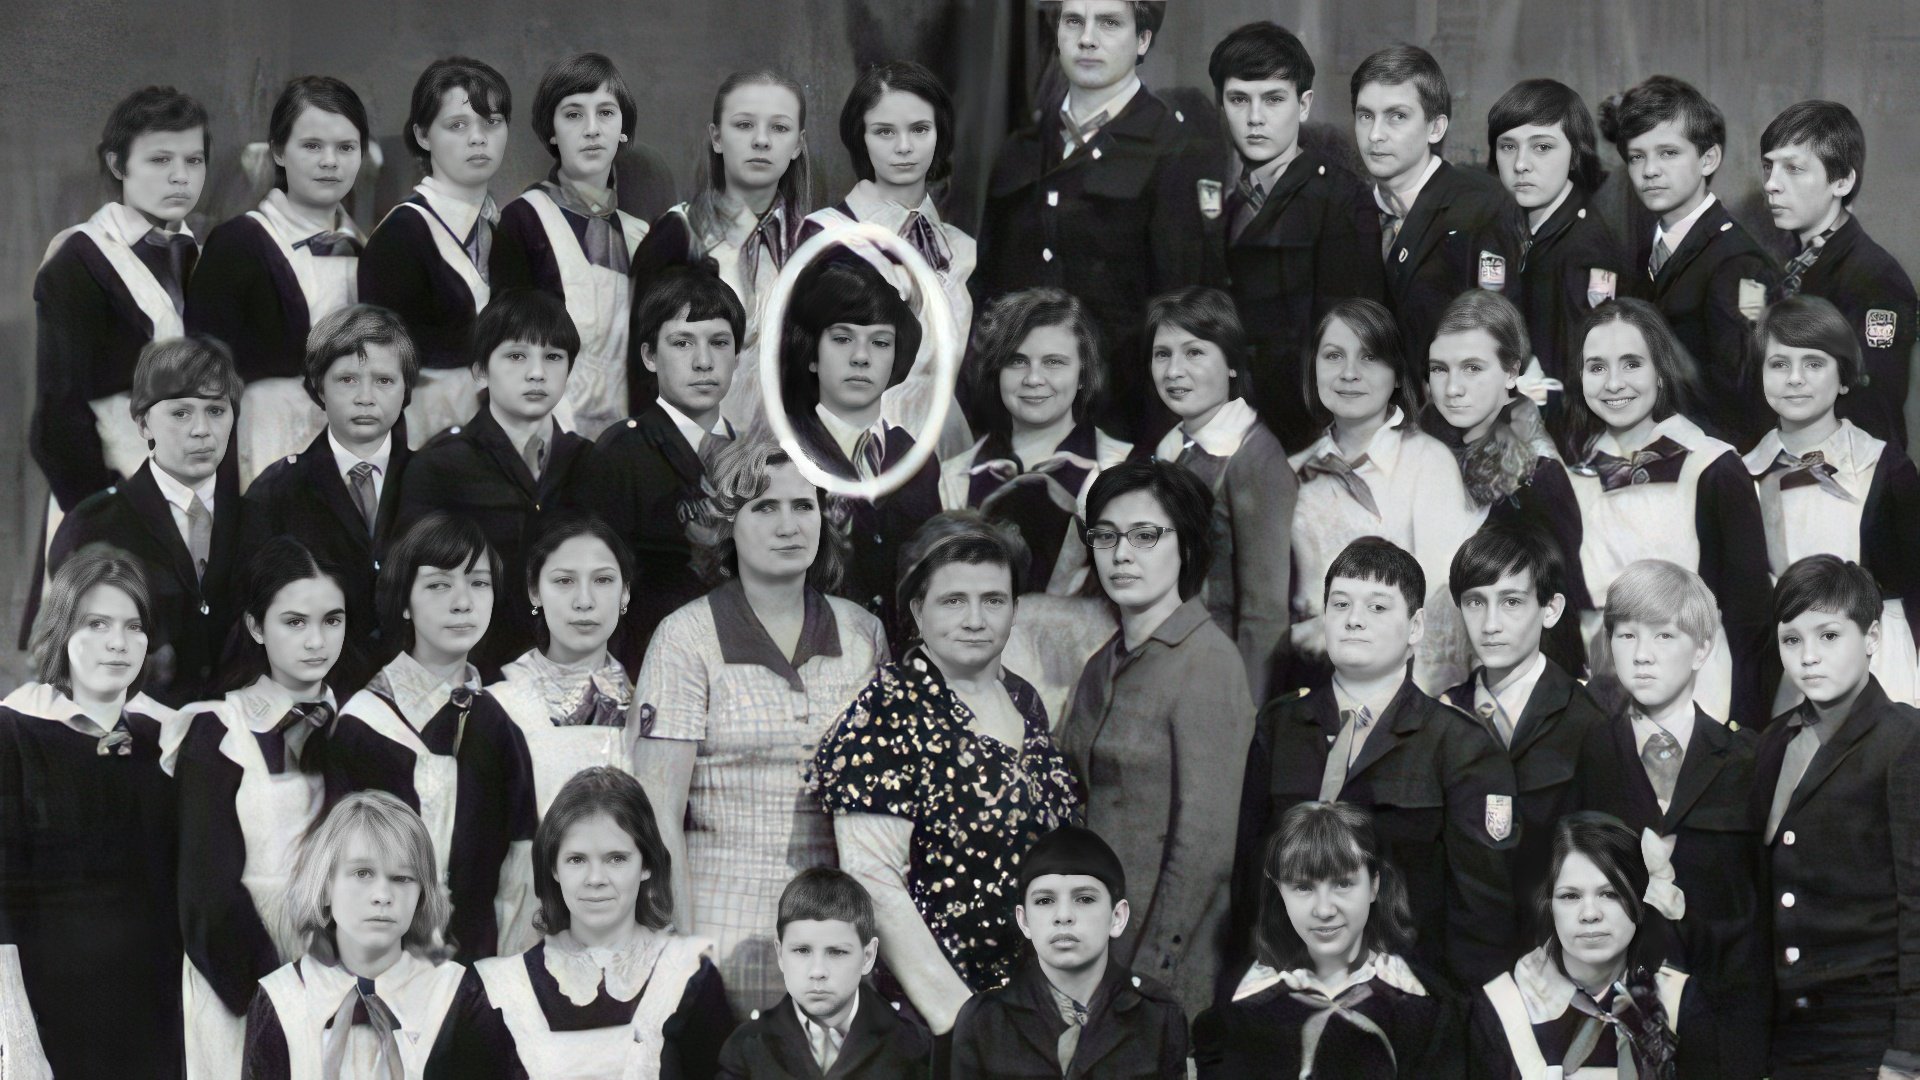 Dmitry Medvedev and his classmates, 1979